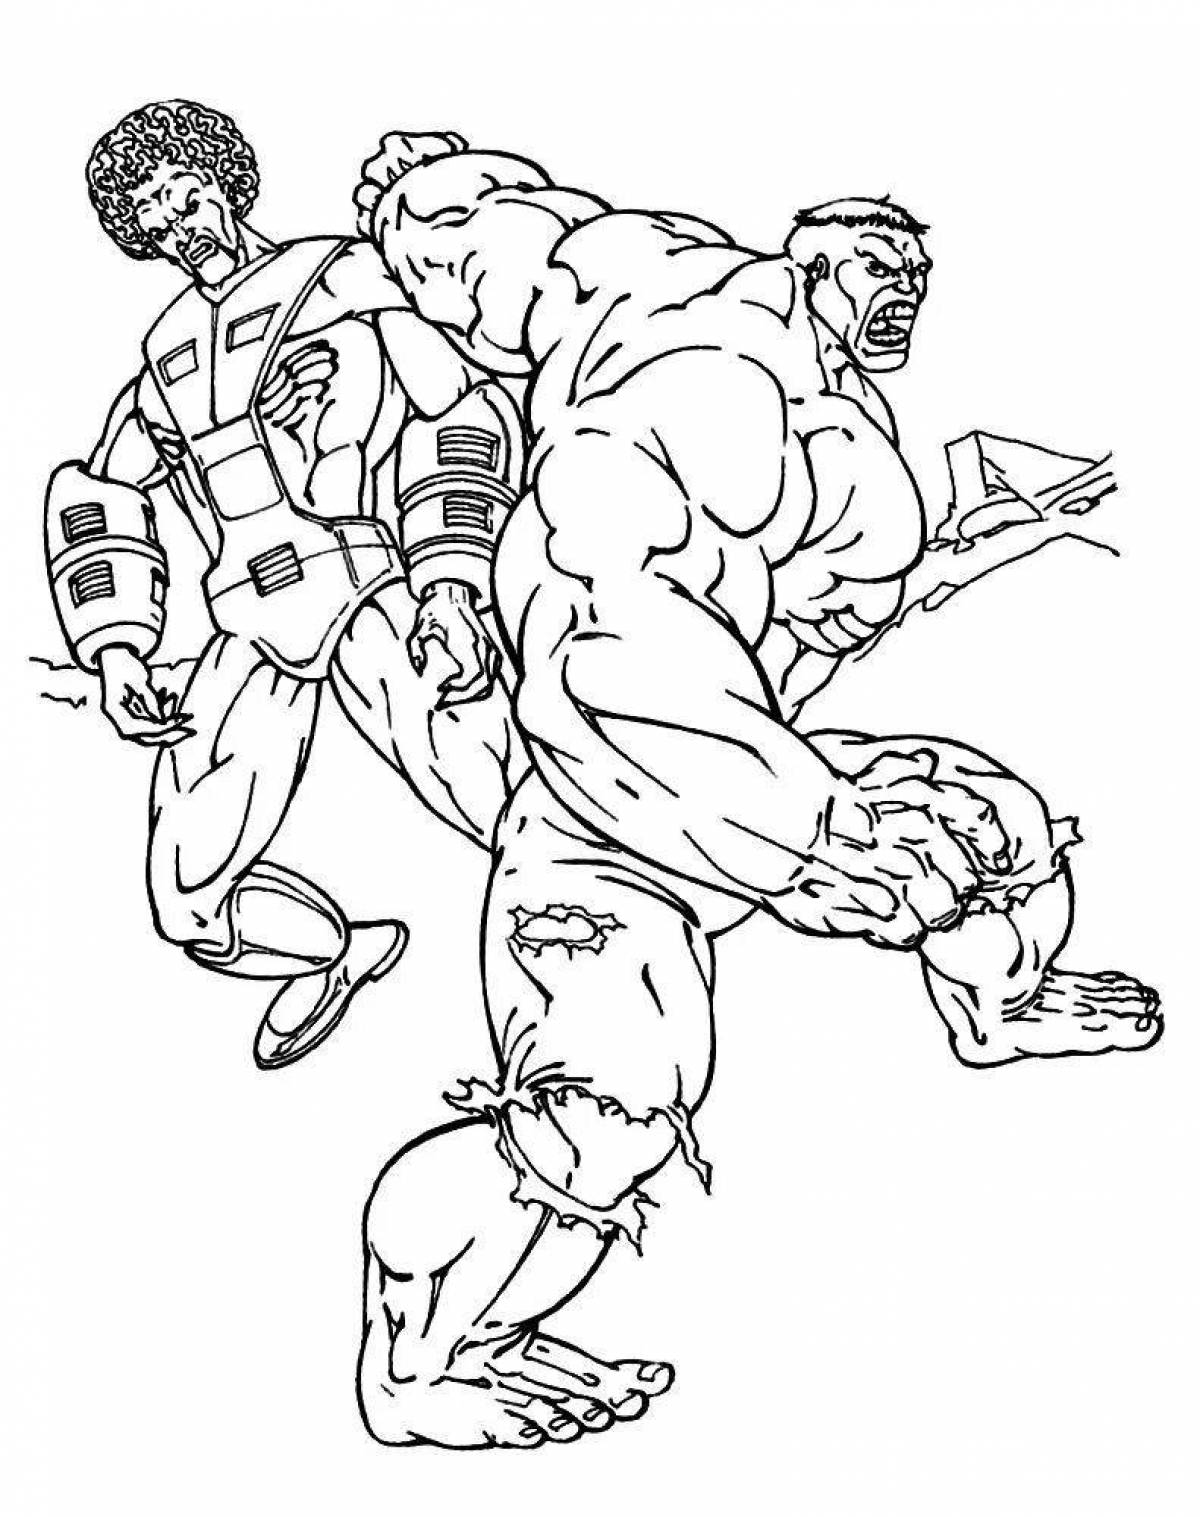 Brightly colored hulk coloring page